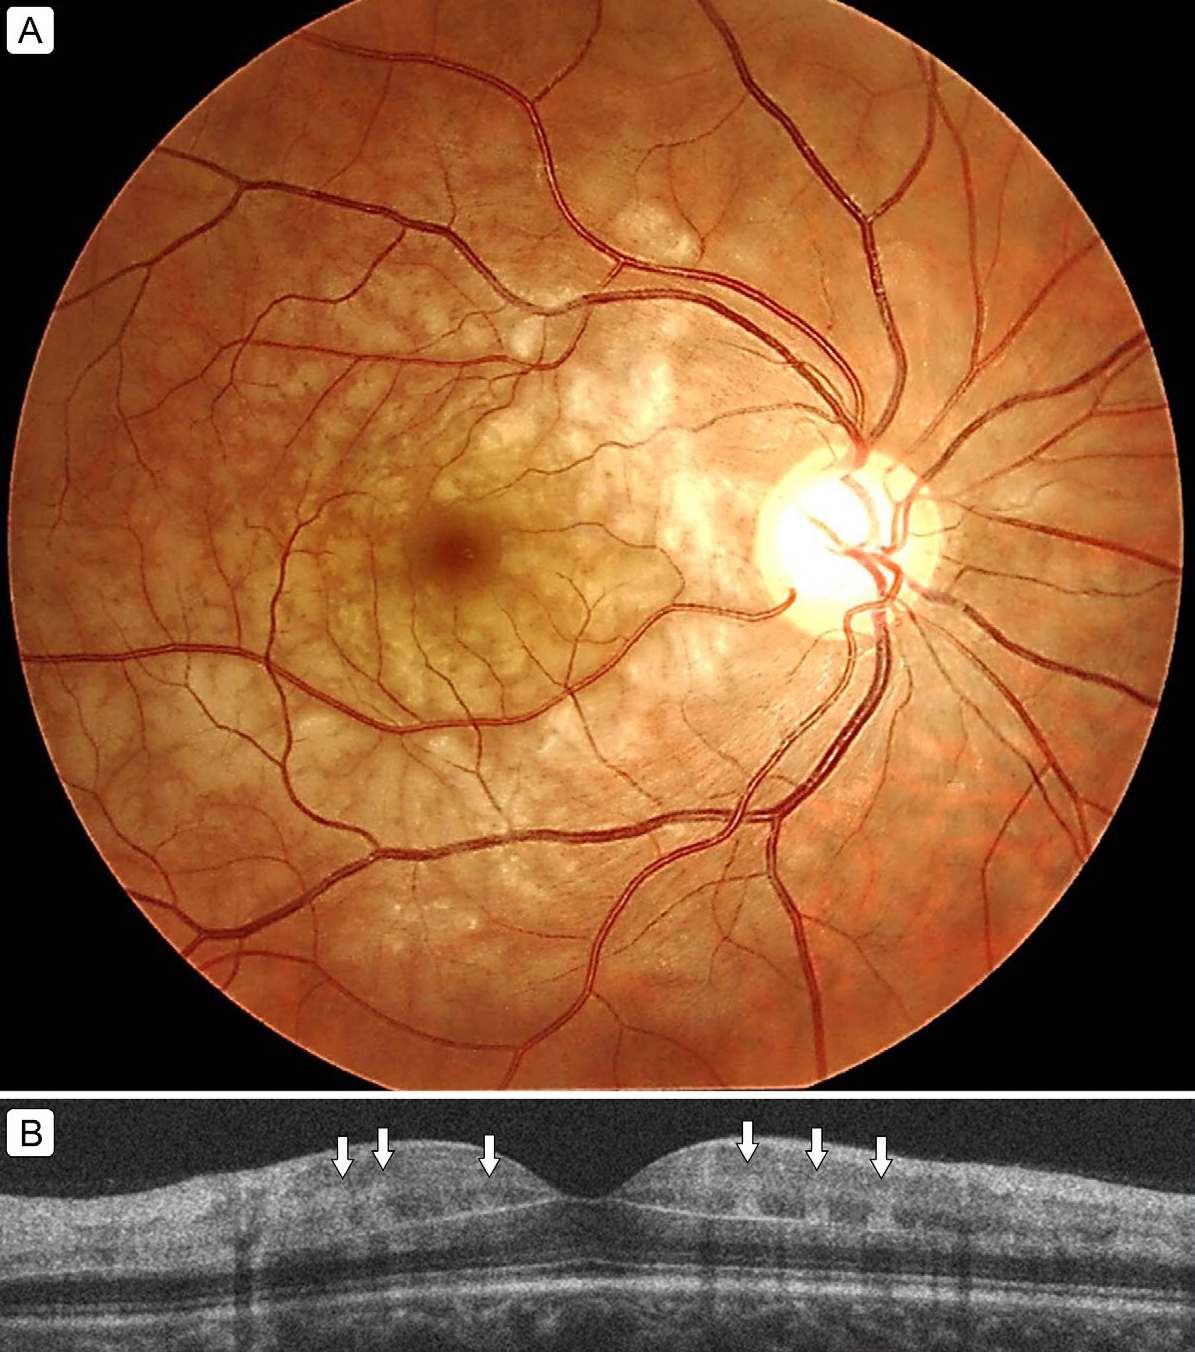 A complete stroke evaluation might be necessary in patients who present with PAMM to prevent a cerebrovascular event or progression to total blindness.